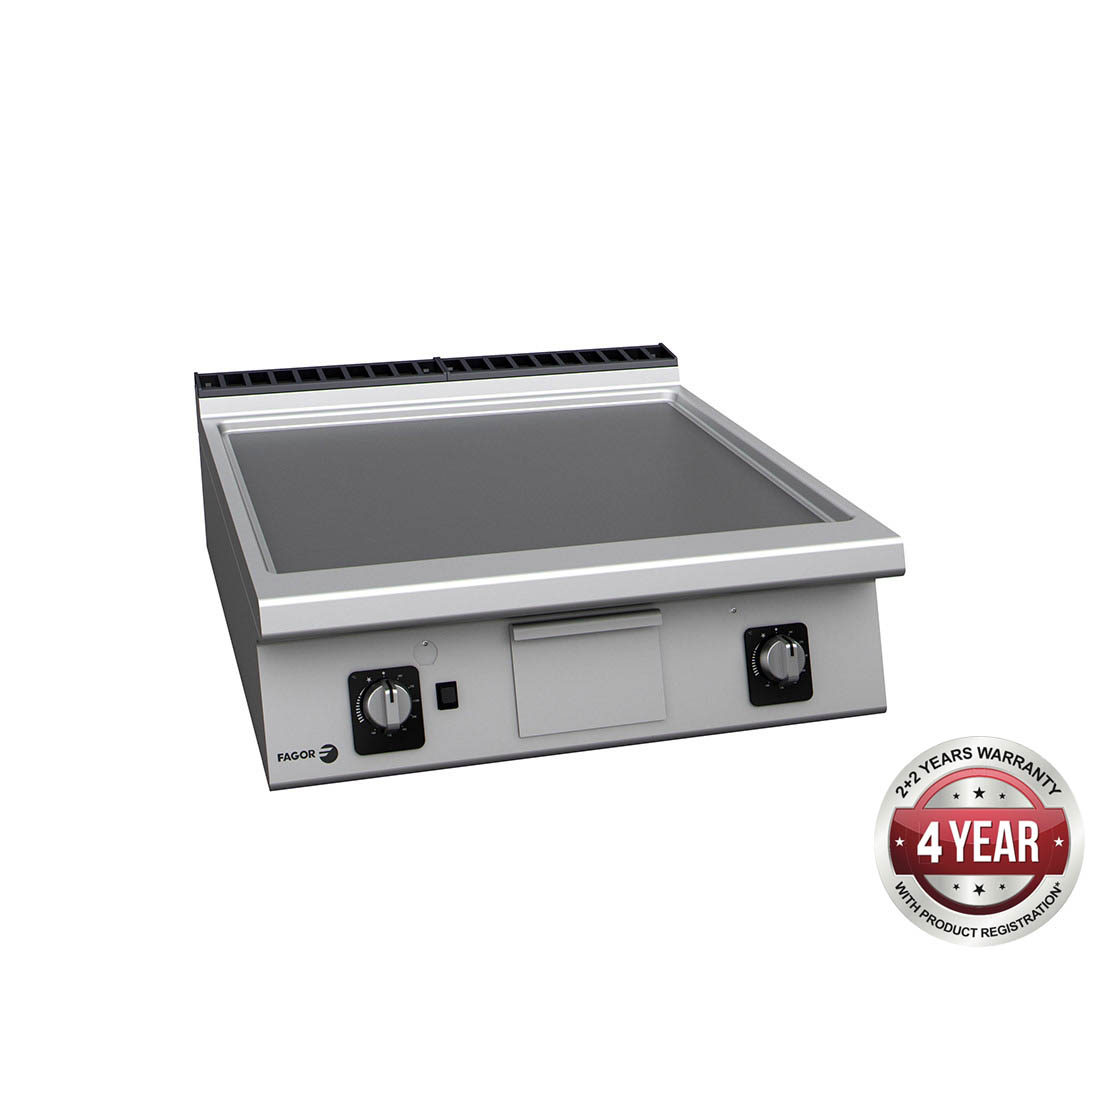 900 series natural gas chrome 2 zone fry top - FT-G910CL